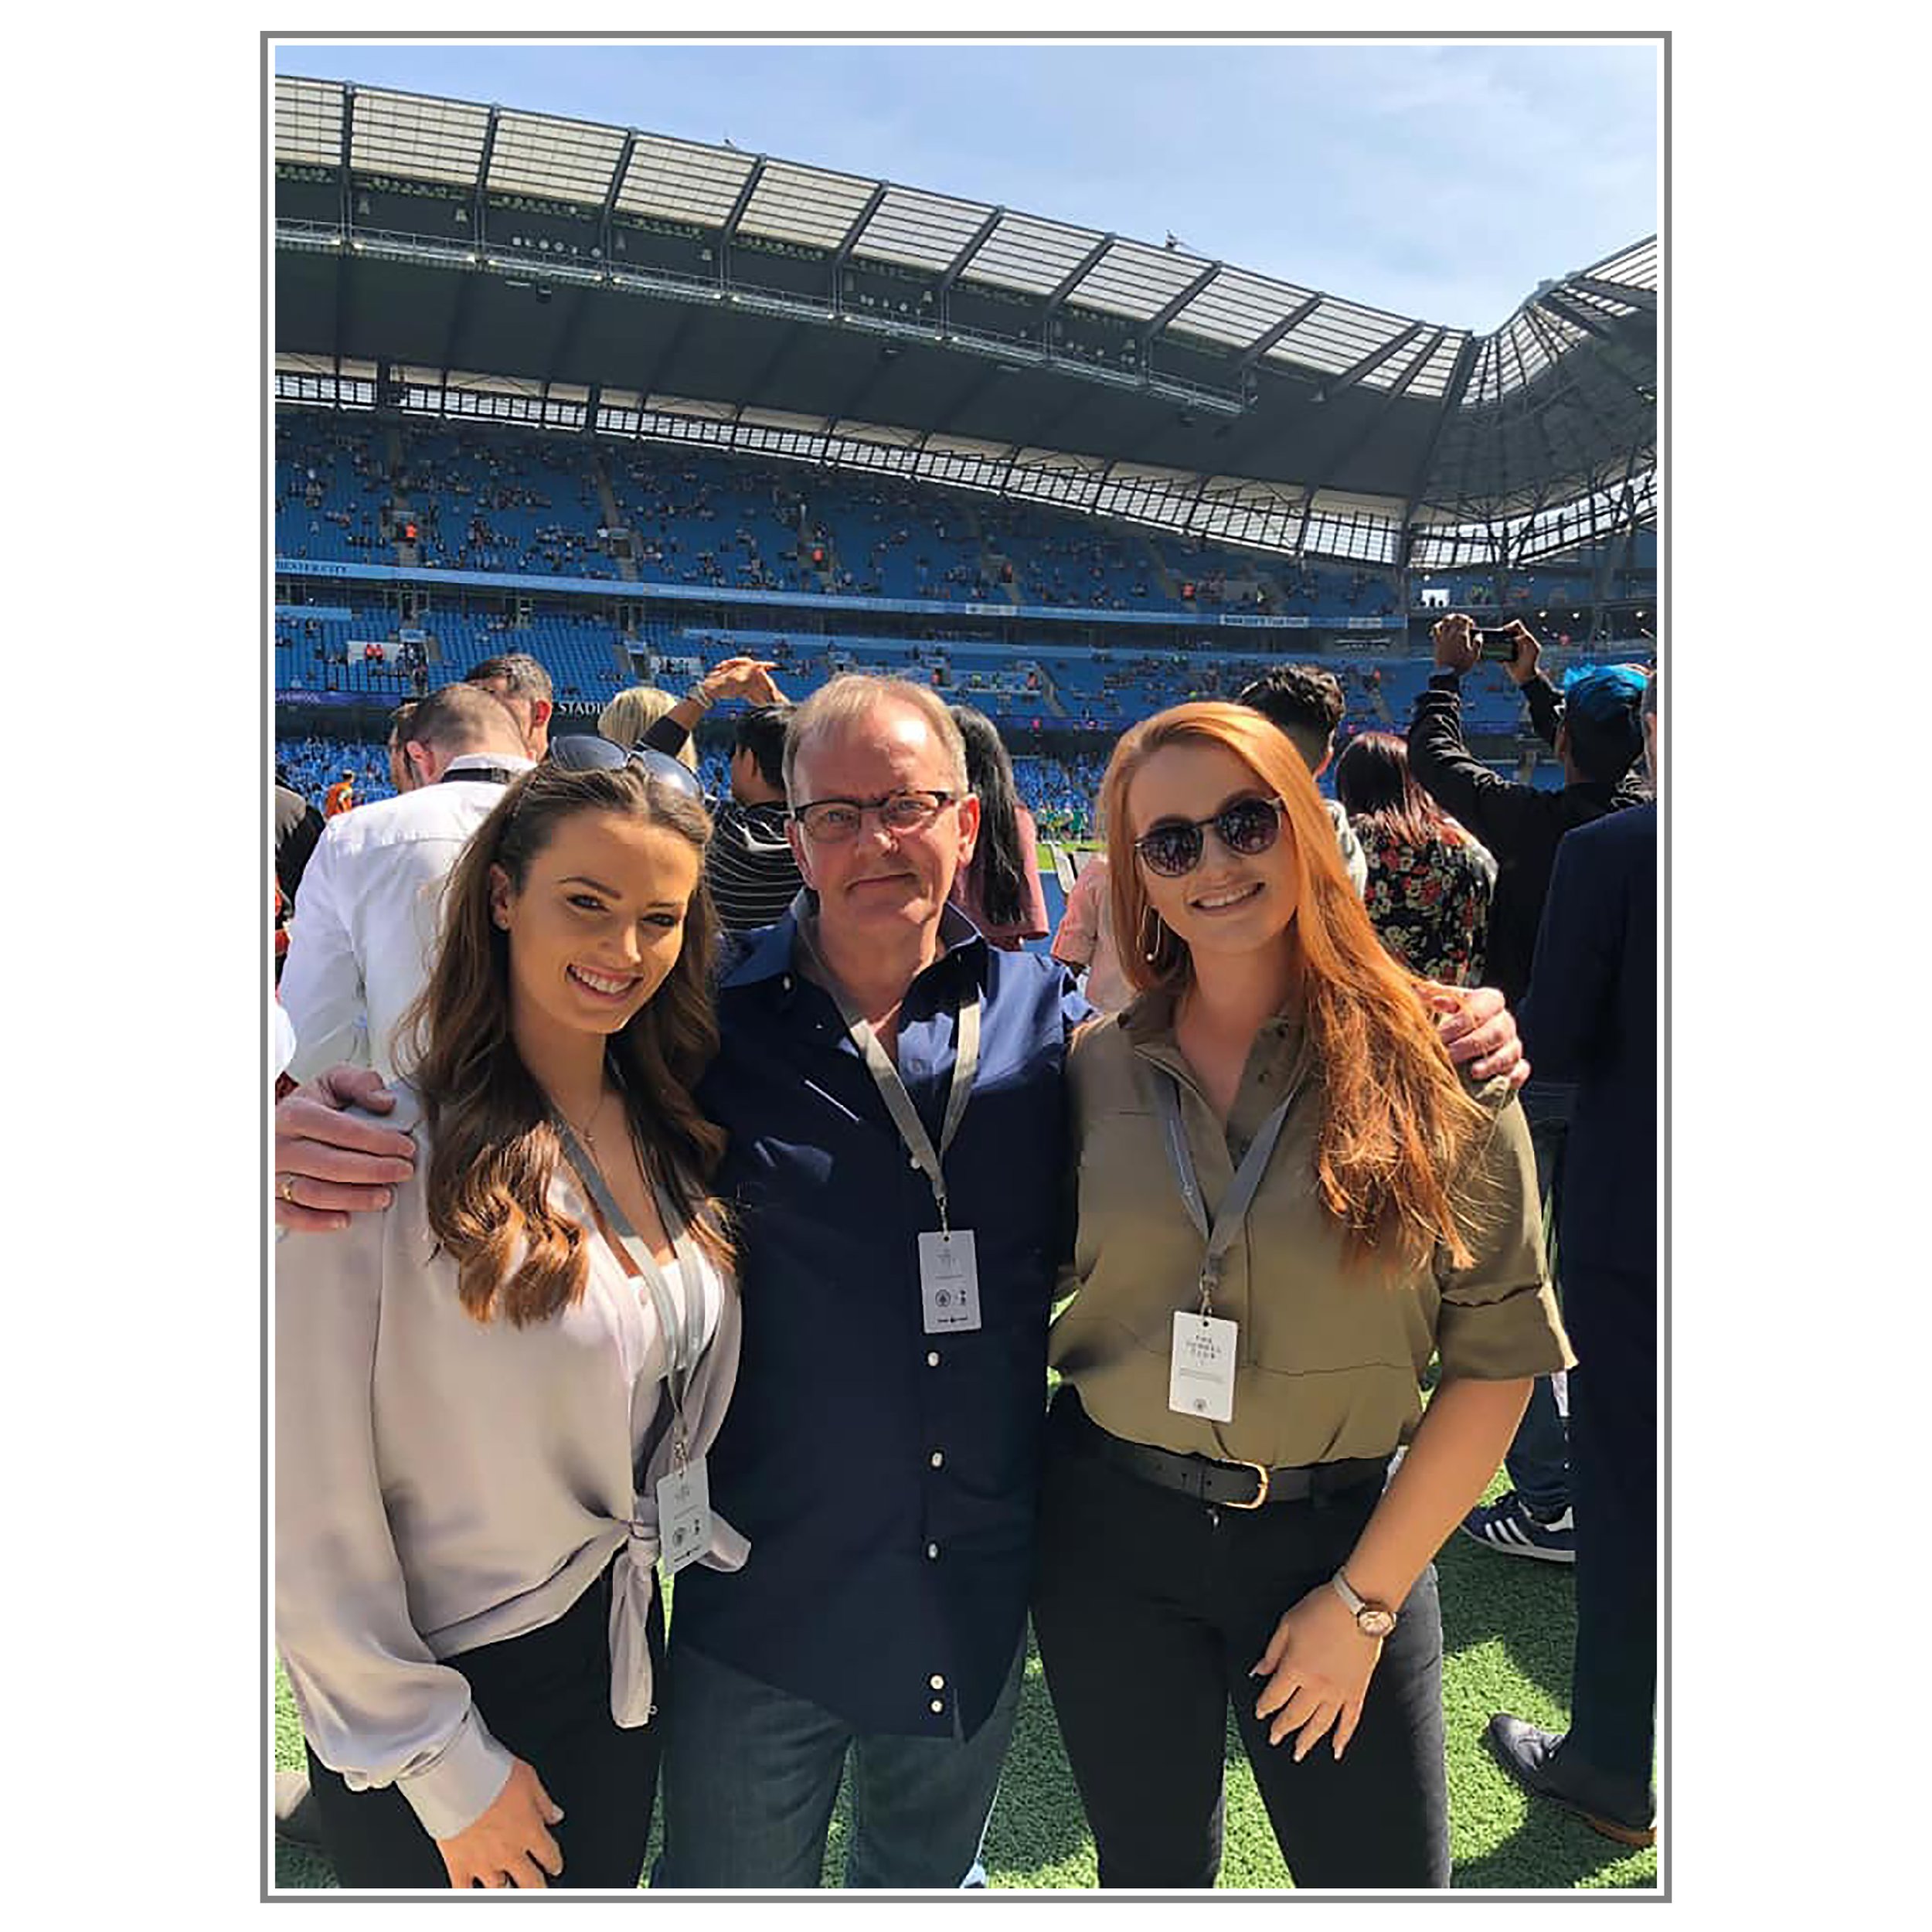 Guests at Etihad Stadium - With my two beautiful Daughters!